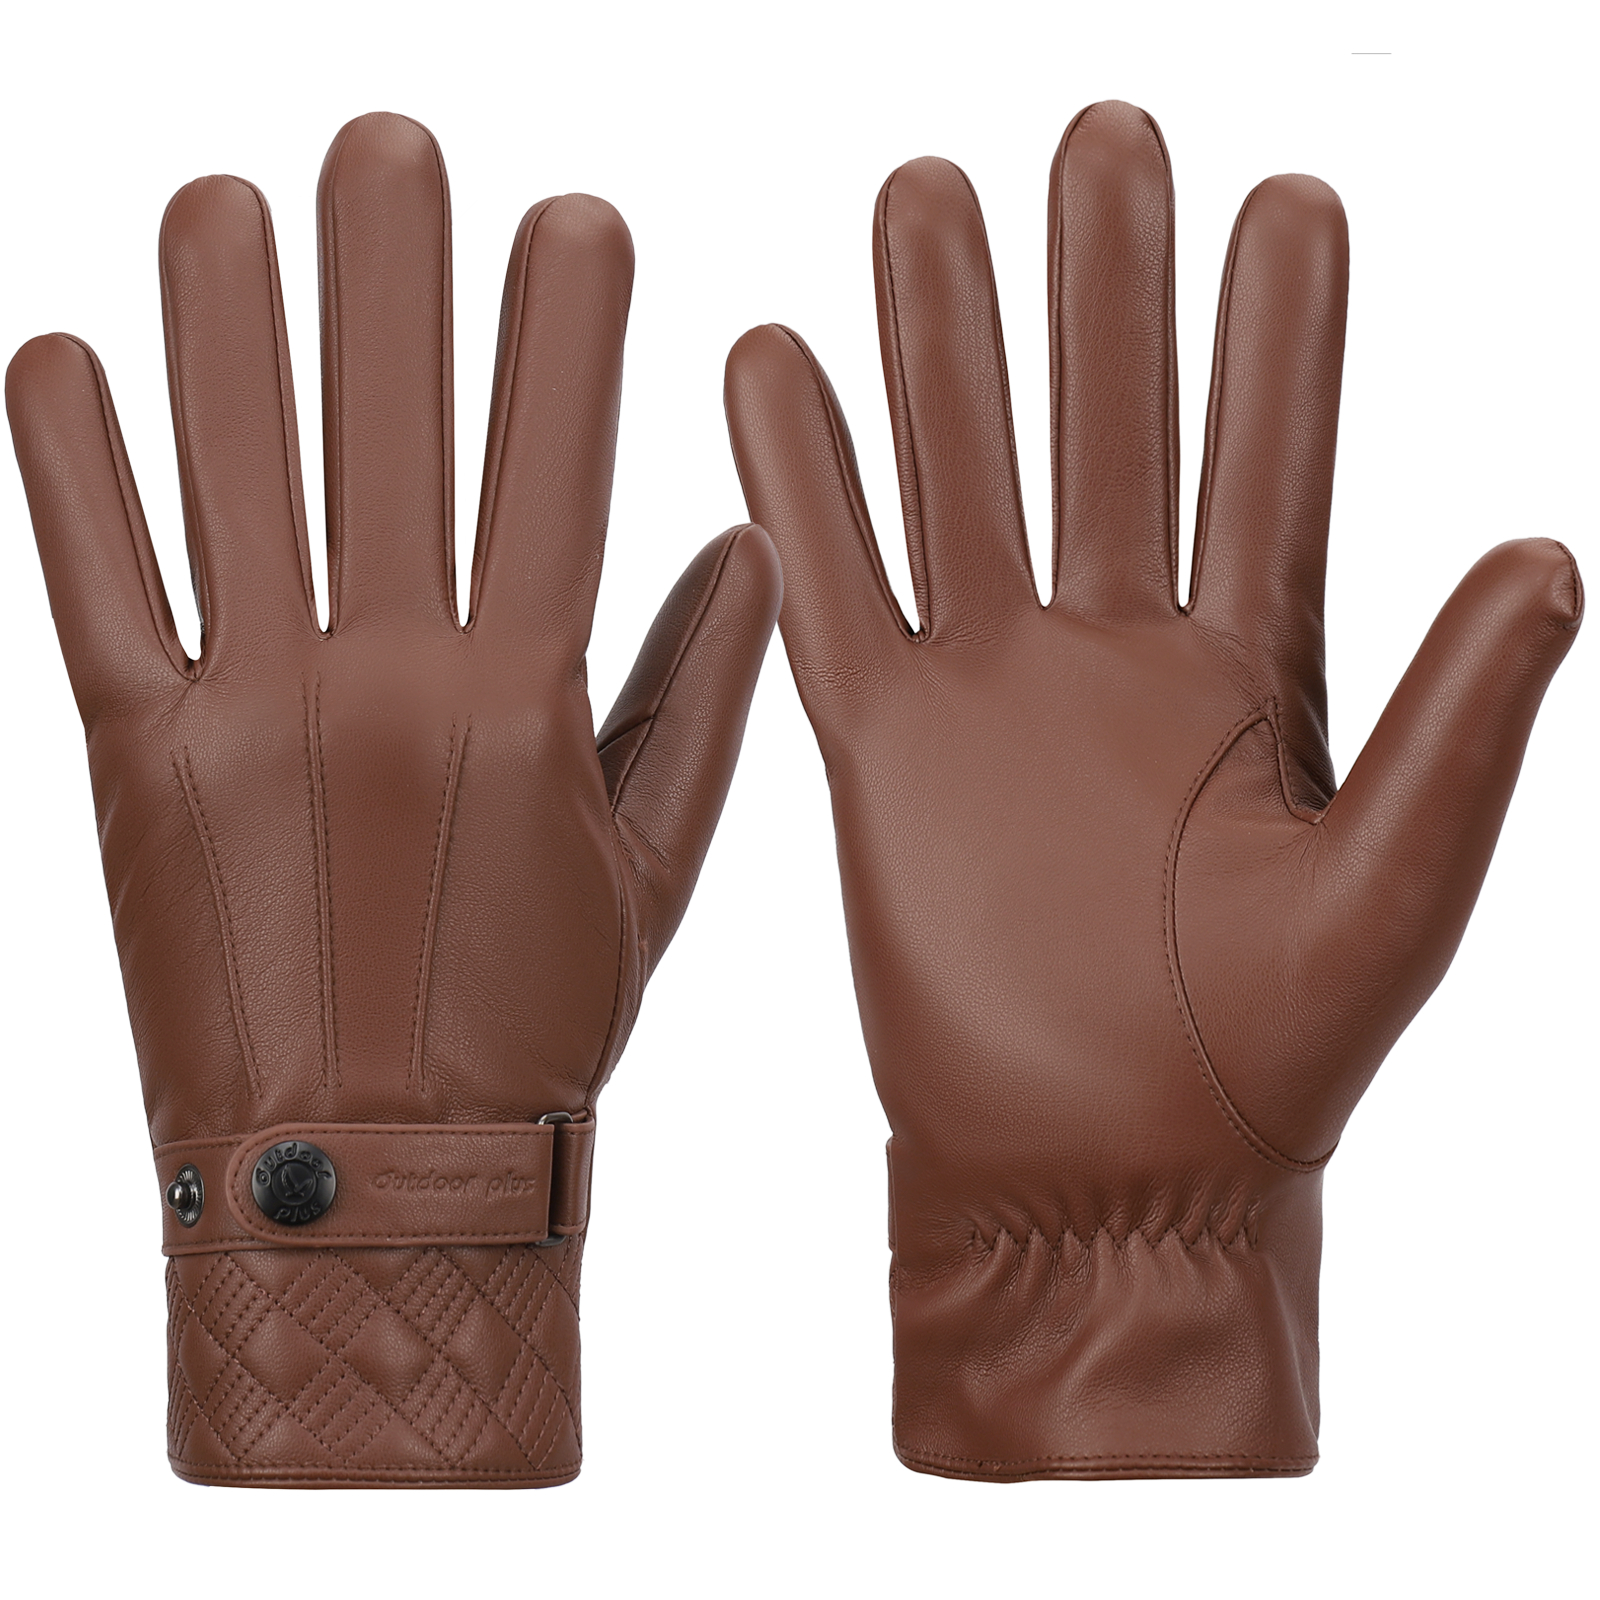 Leather Gloves for Men, Warm Wool Lined PU Leather Winter Gloves Touchscreen Texting,Driving Gloves Men Waterproof - image 1 of 7